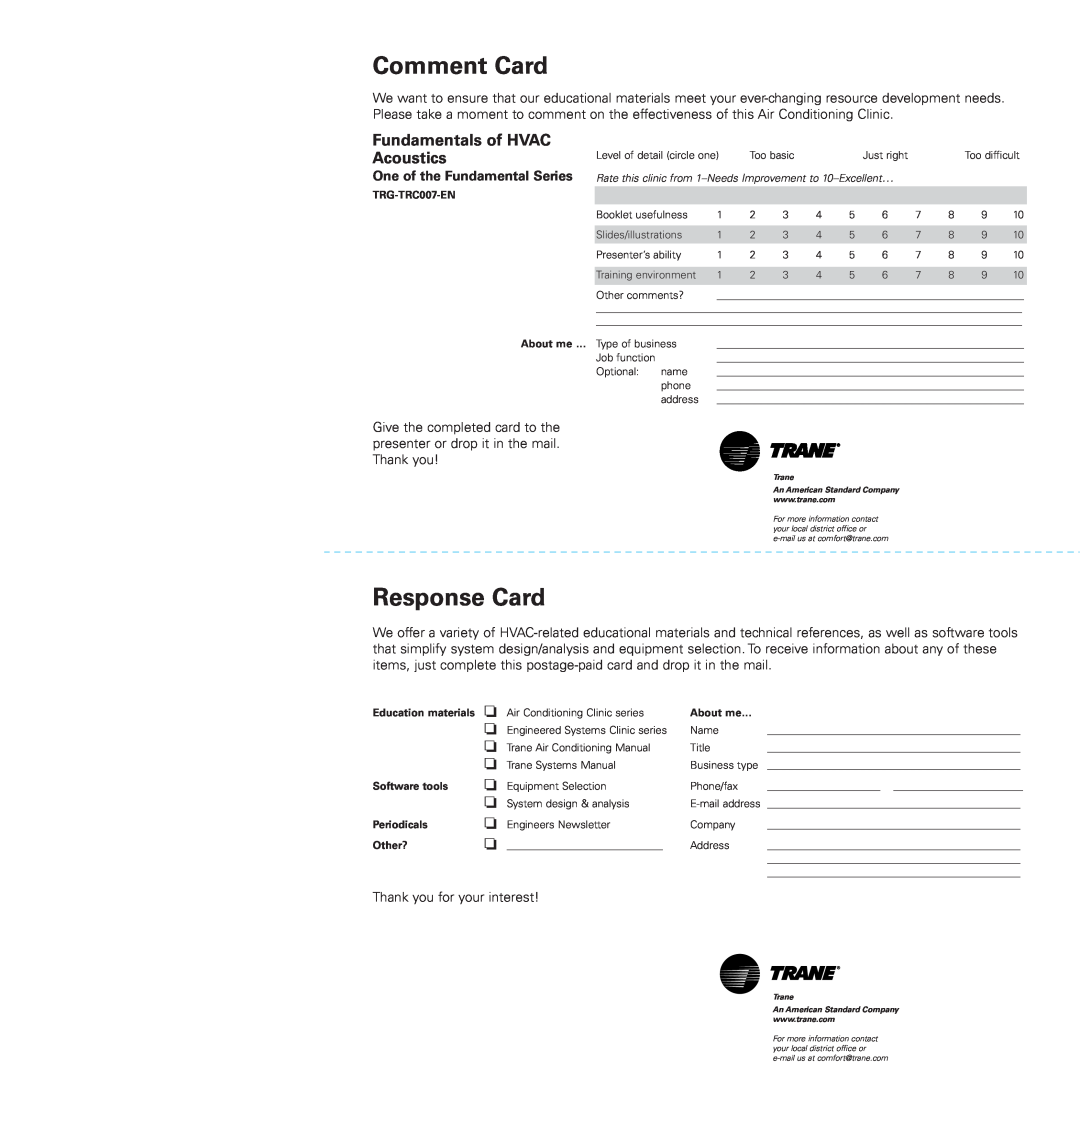 Trane TRG-TRC007-EN manual Comment Card, Response Card, Fundamentals of HVAC, Acoustics, One of the Fundamental Series 